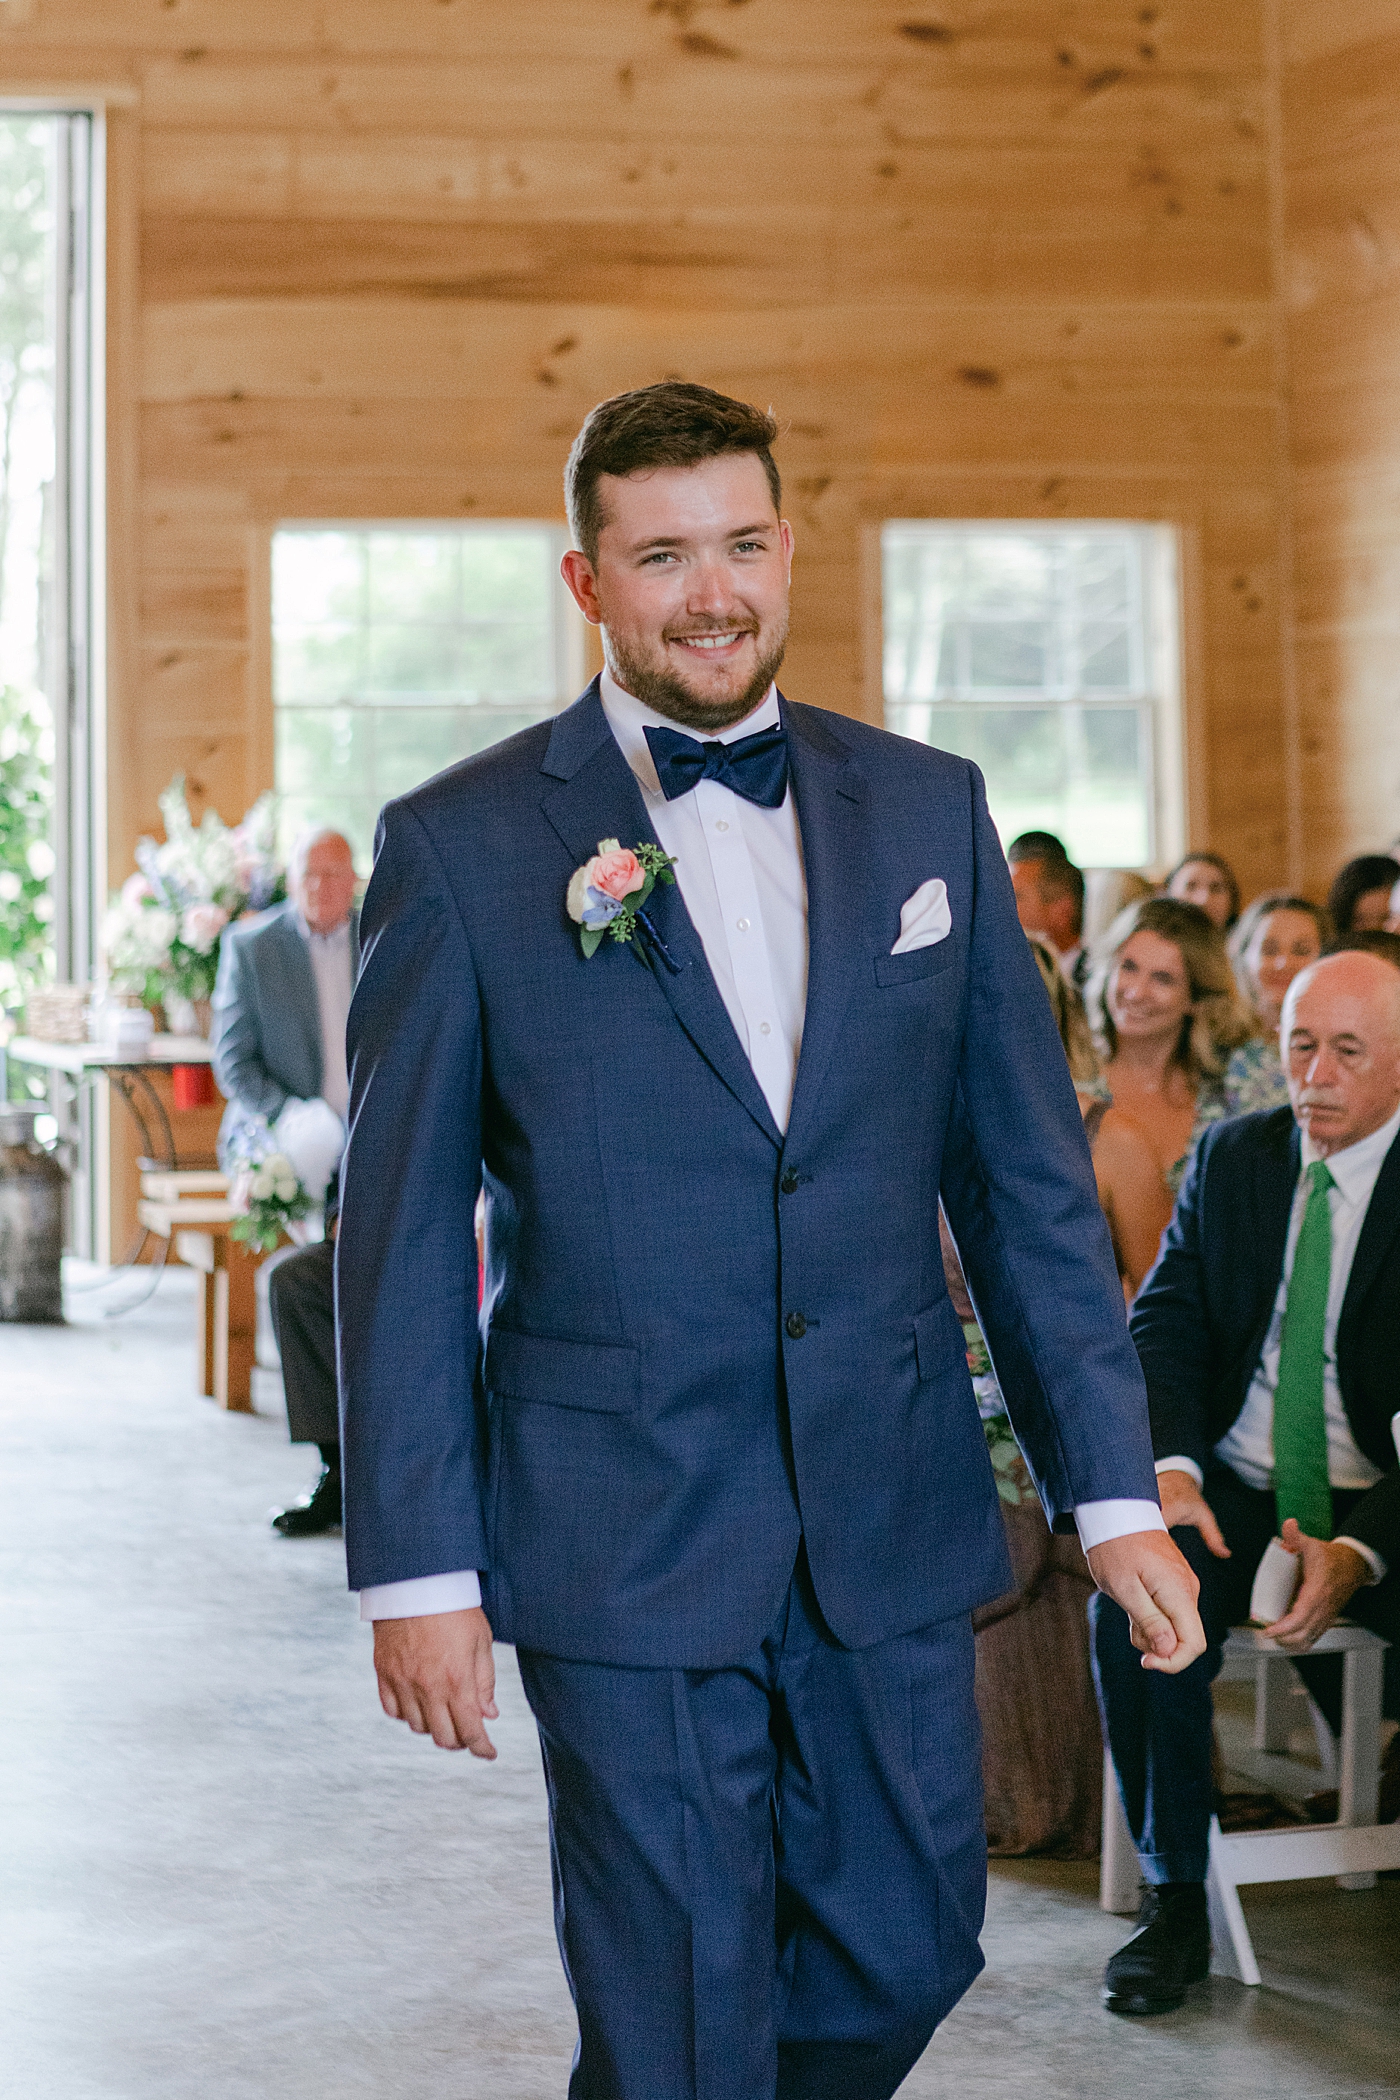 Groom smiling walking down the aisle | Image by Hudson Valley Wedding Photographer Hope Helmuth